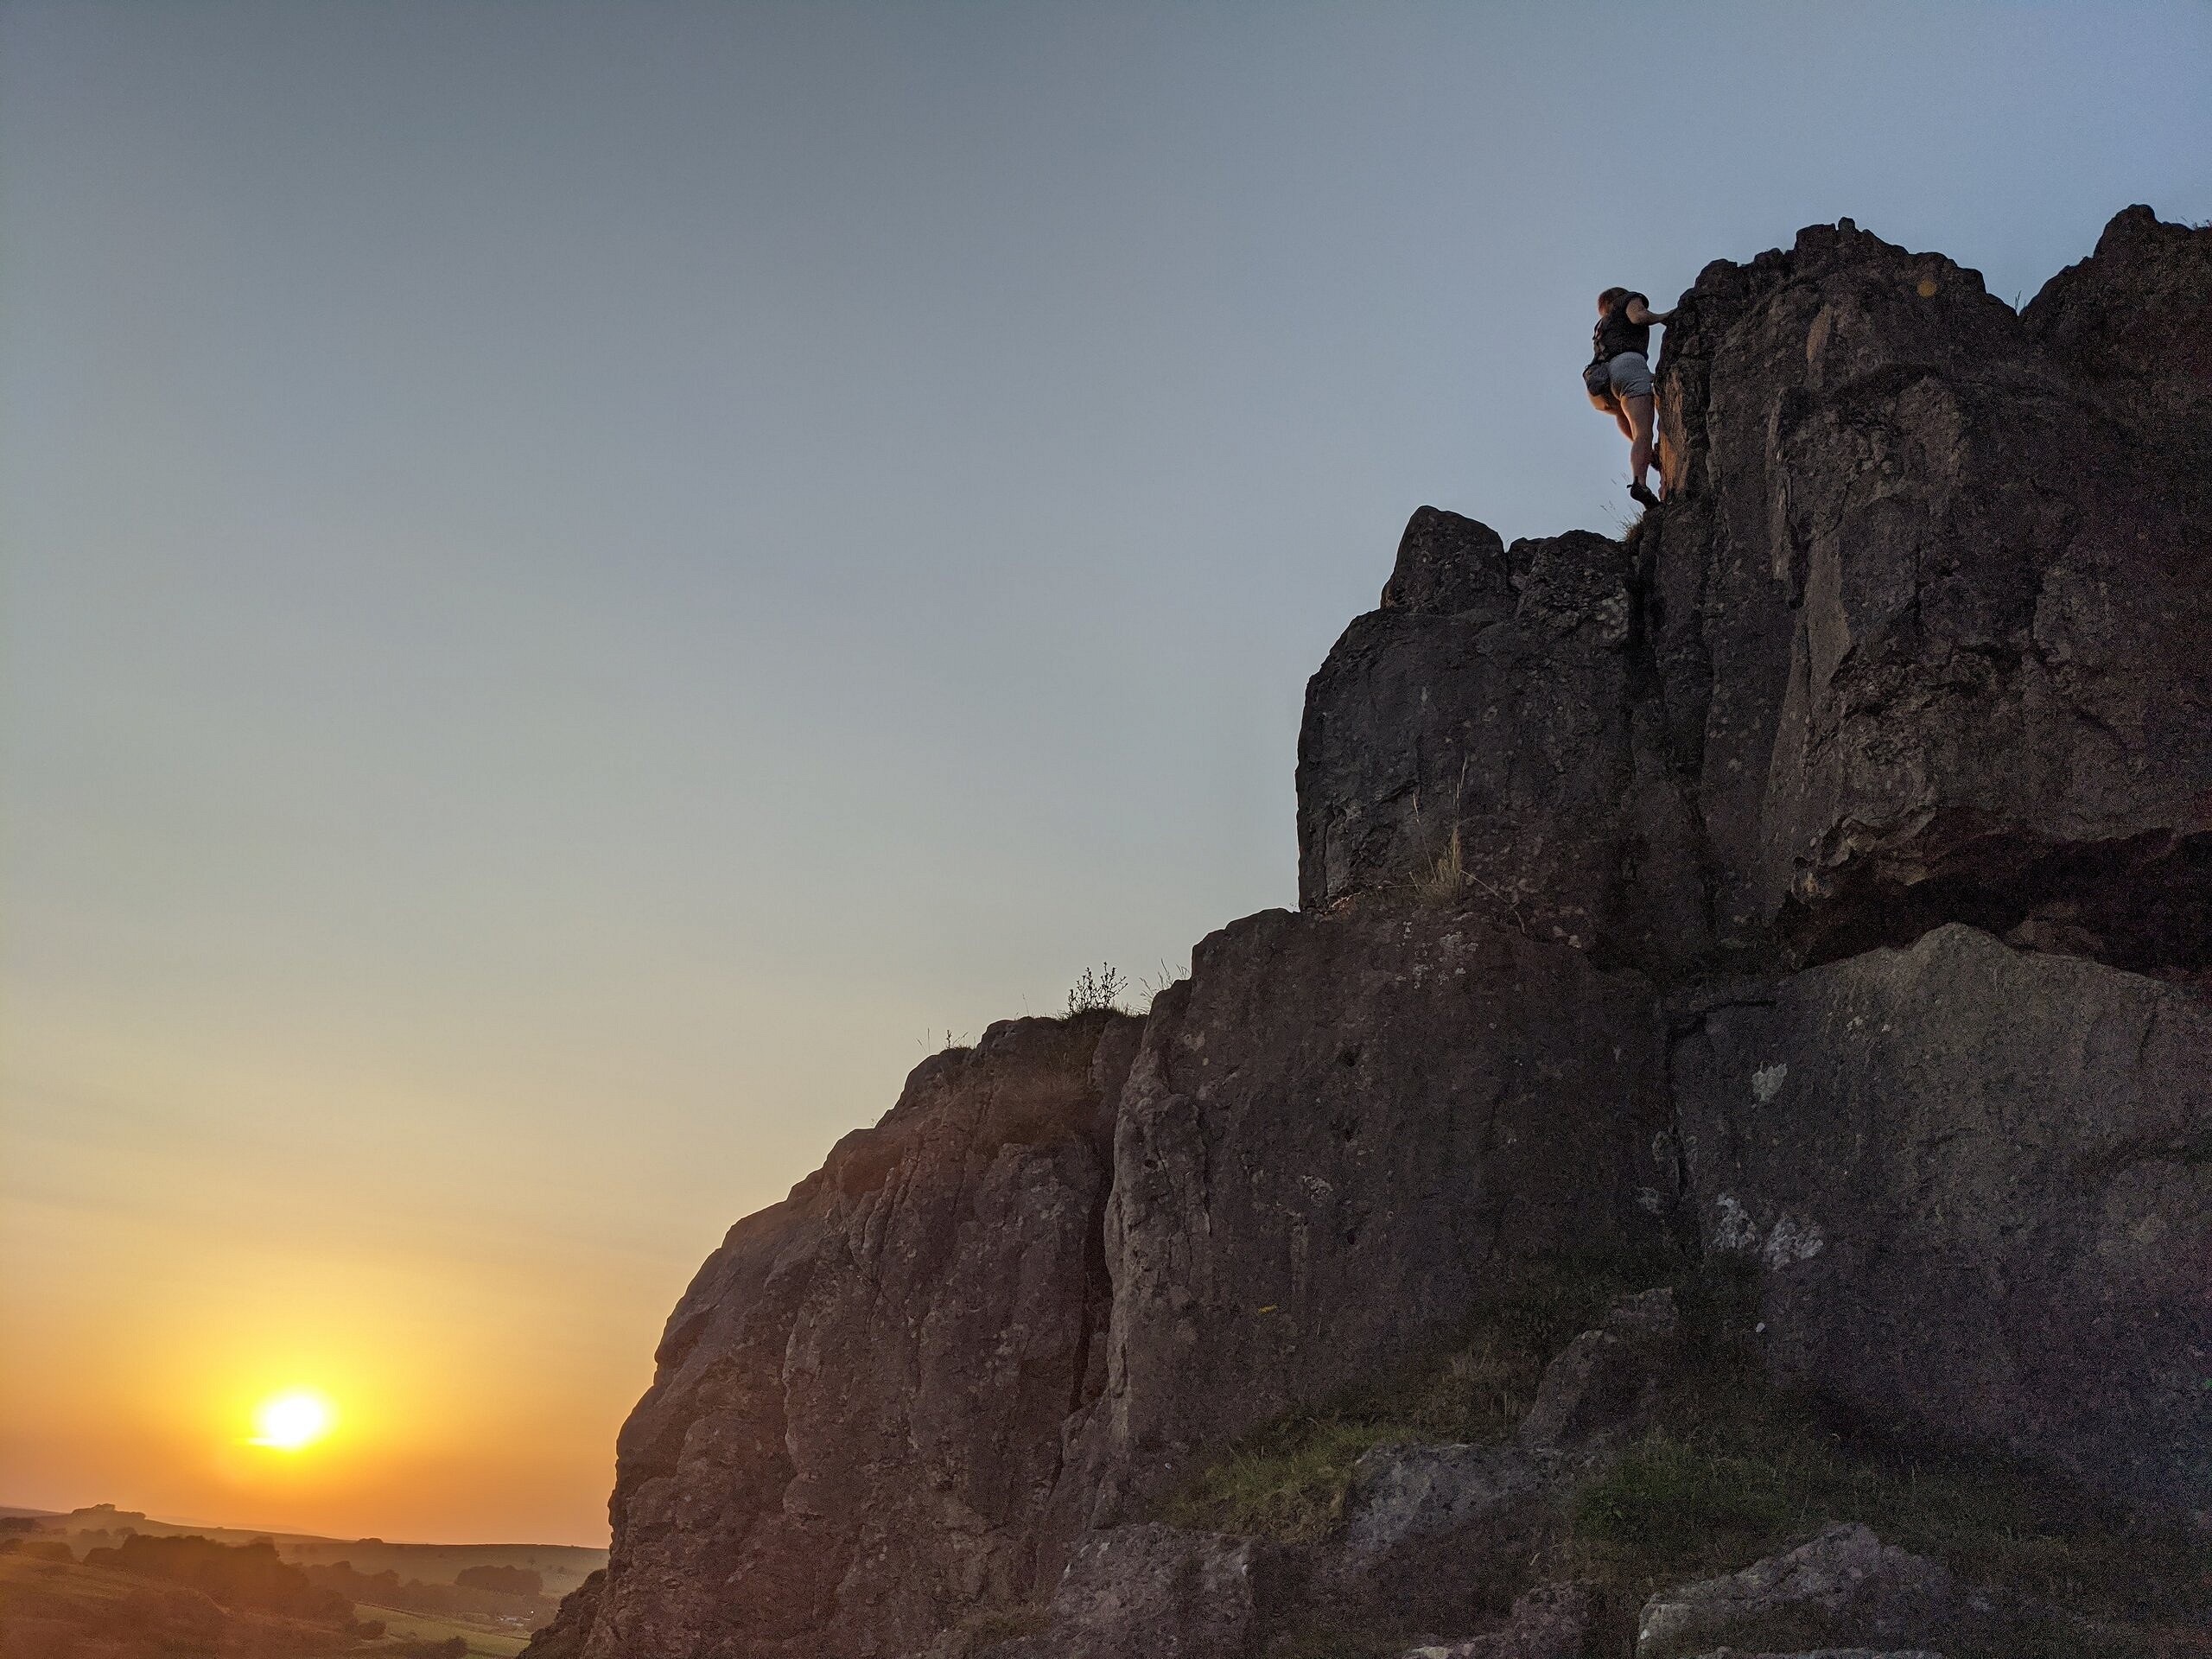 Ginette soloing Introductory Wall before the sun sets.   © GinetteRachel